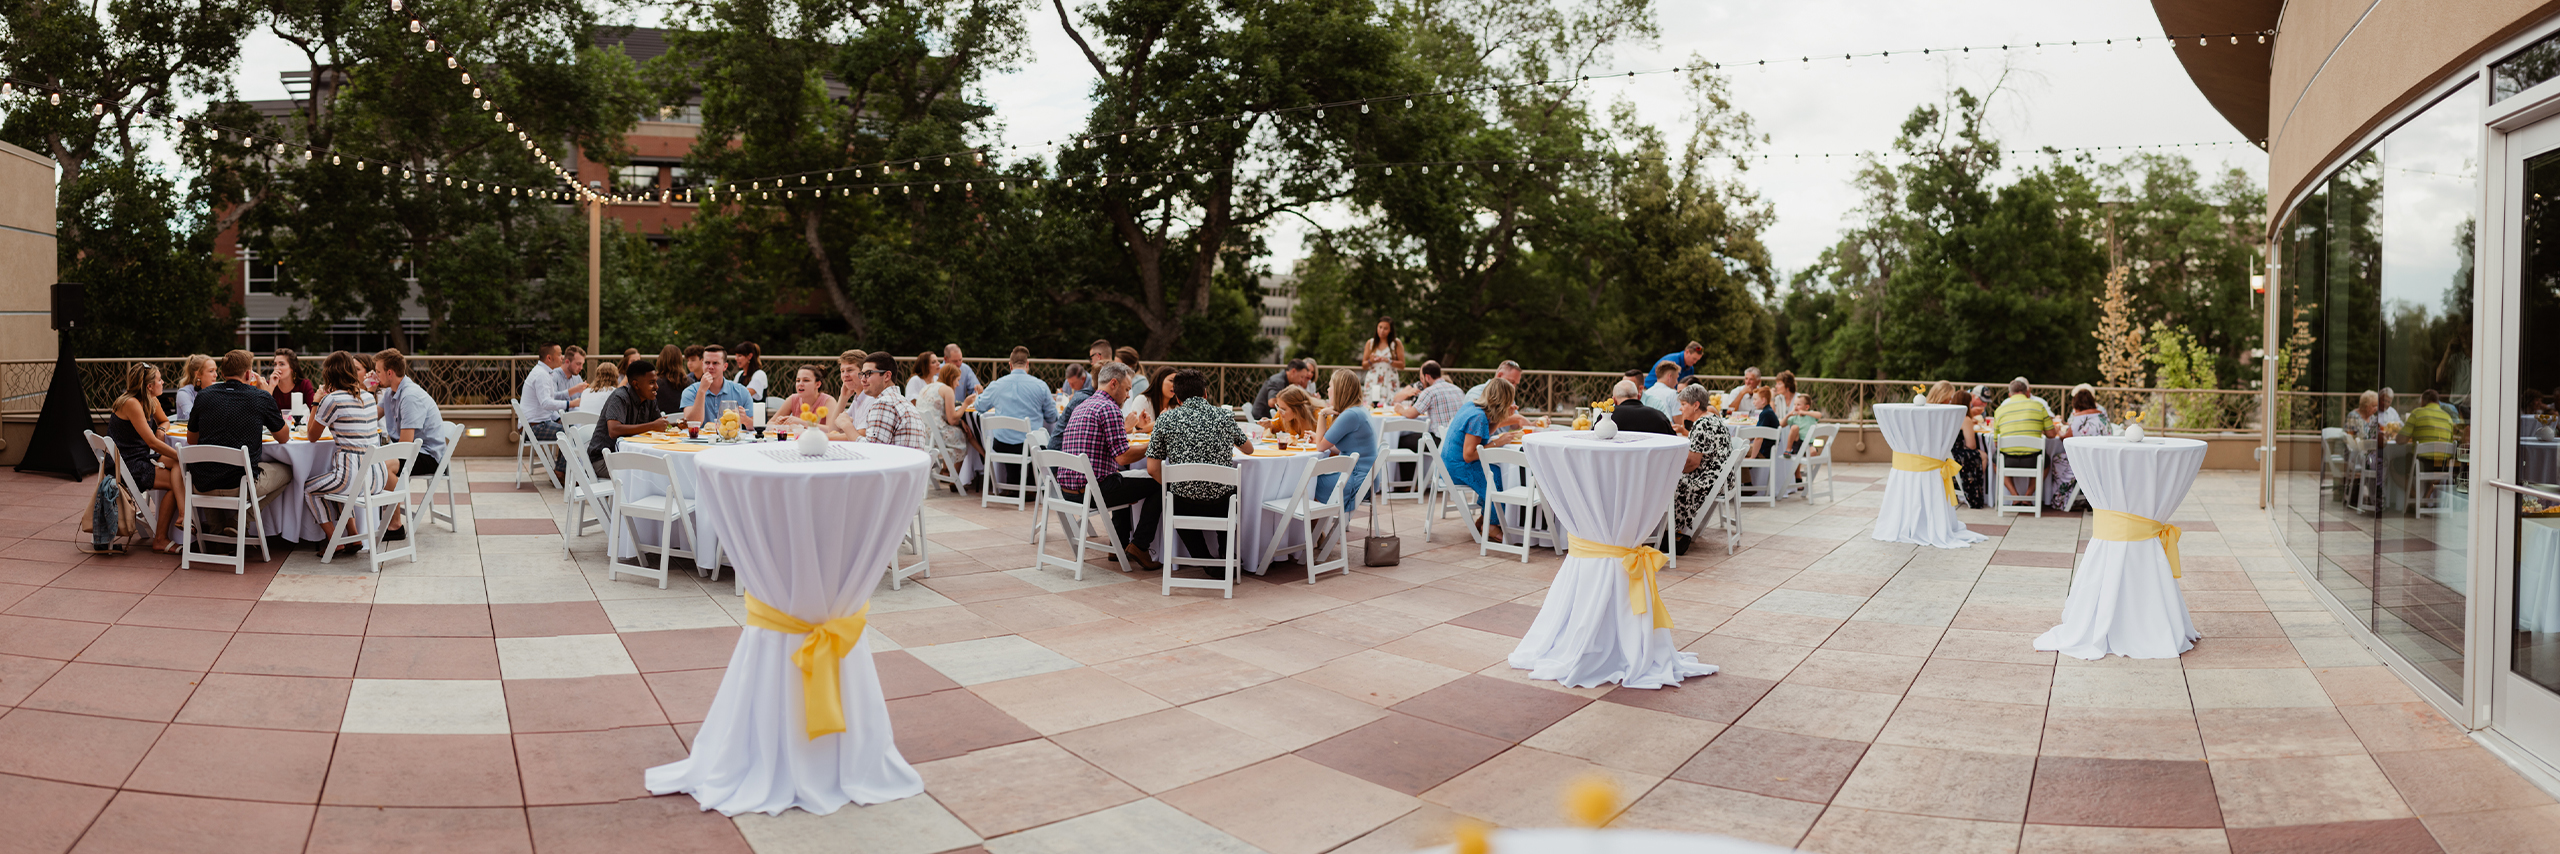 Guests enjoy themselves at a wedding reception on the Rooftop Deck.